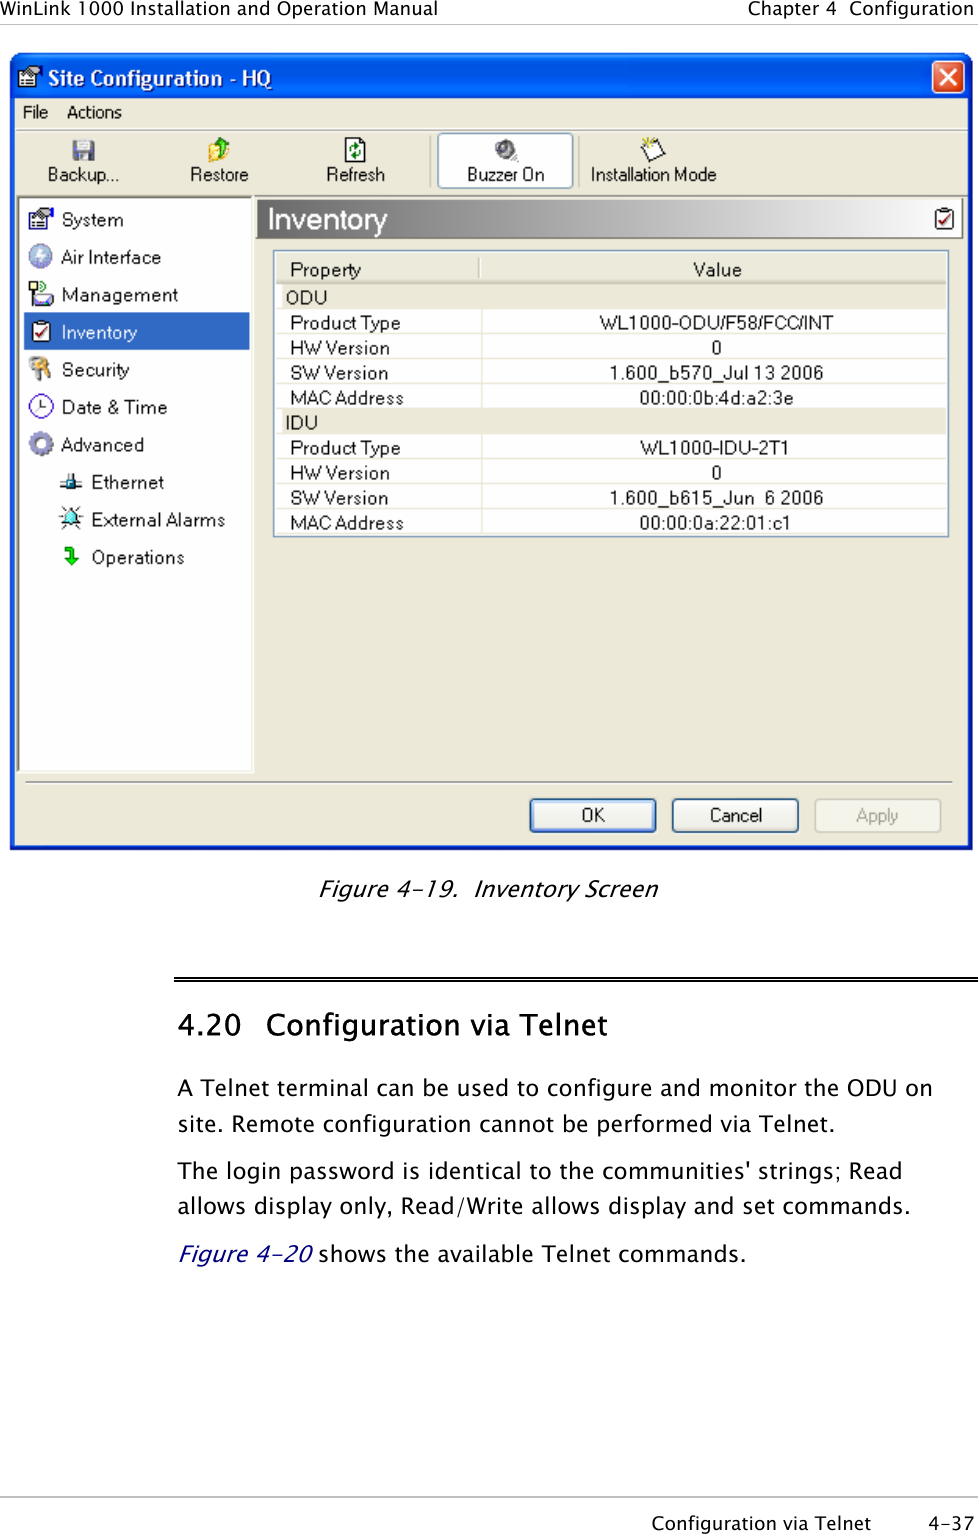 WinLink 1000 Installation and Operation Manual  Chapter  4  Configuration  Figure  4-19.  Inventory Screen 4.20 Configuration via Telnet A Telnet terminal can be used to configure and monitor the ODU on site. Remote configuration cannot be performed via Telnet.  The login password is identical to the communities&apos; strings; Read allows display only, Read/Write allows display and set commands. Figure  4-20 shows the available Telnet commands.  Configuration via Telnet  4-37 